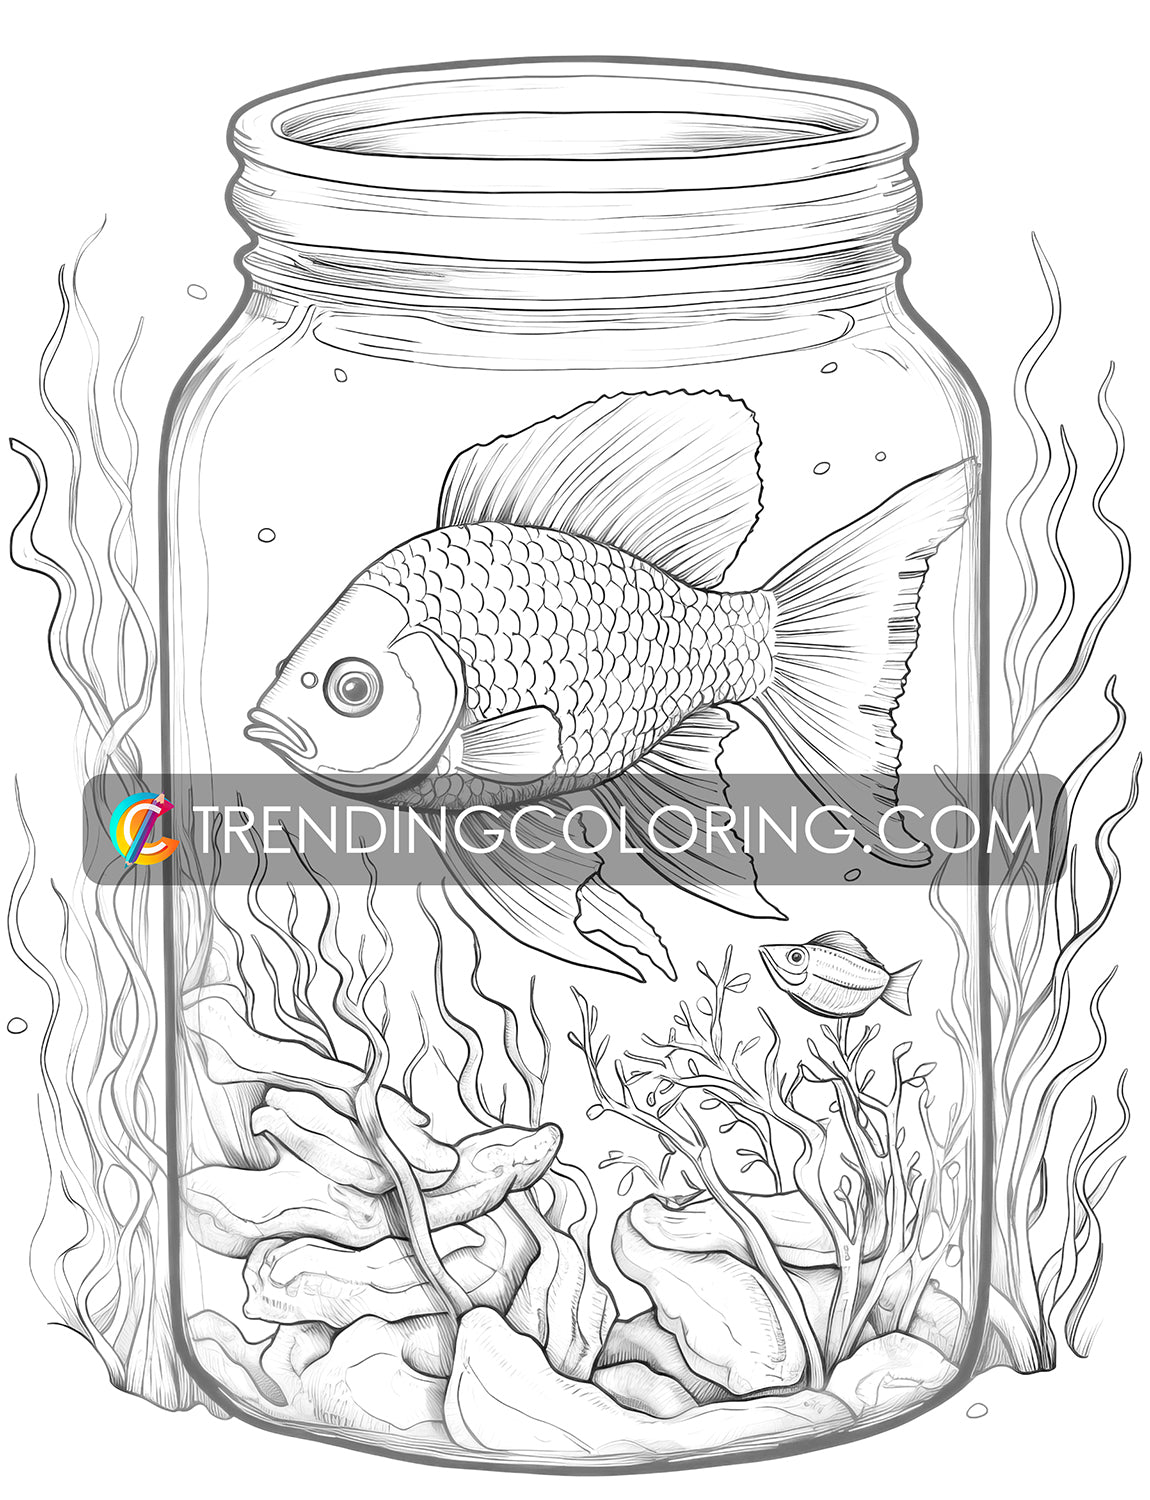 25 Ocean In Jar Grayscale Coloring Pages - Instant Download - Printable PDF Dark/Light